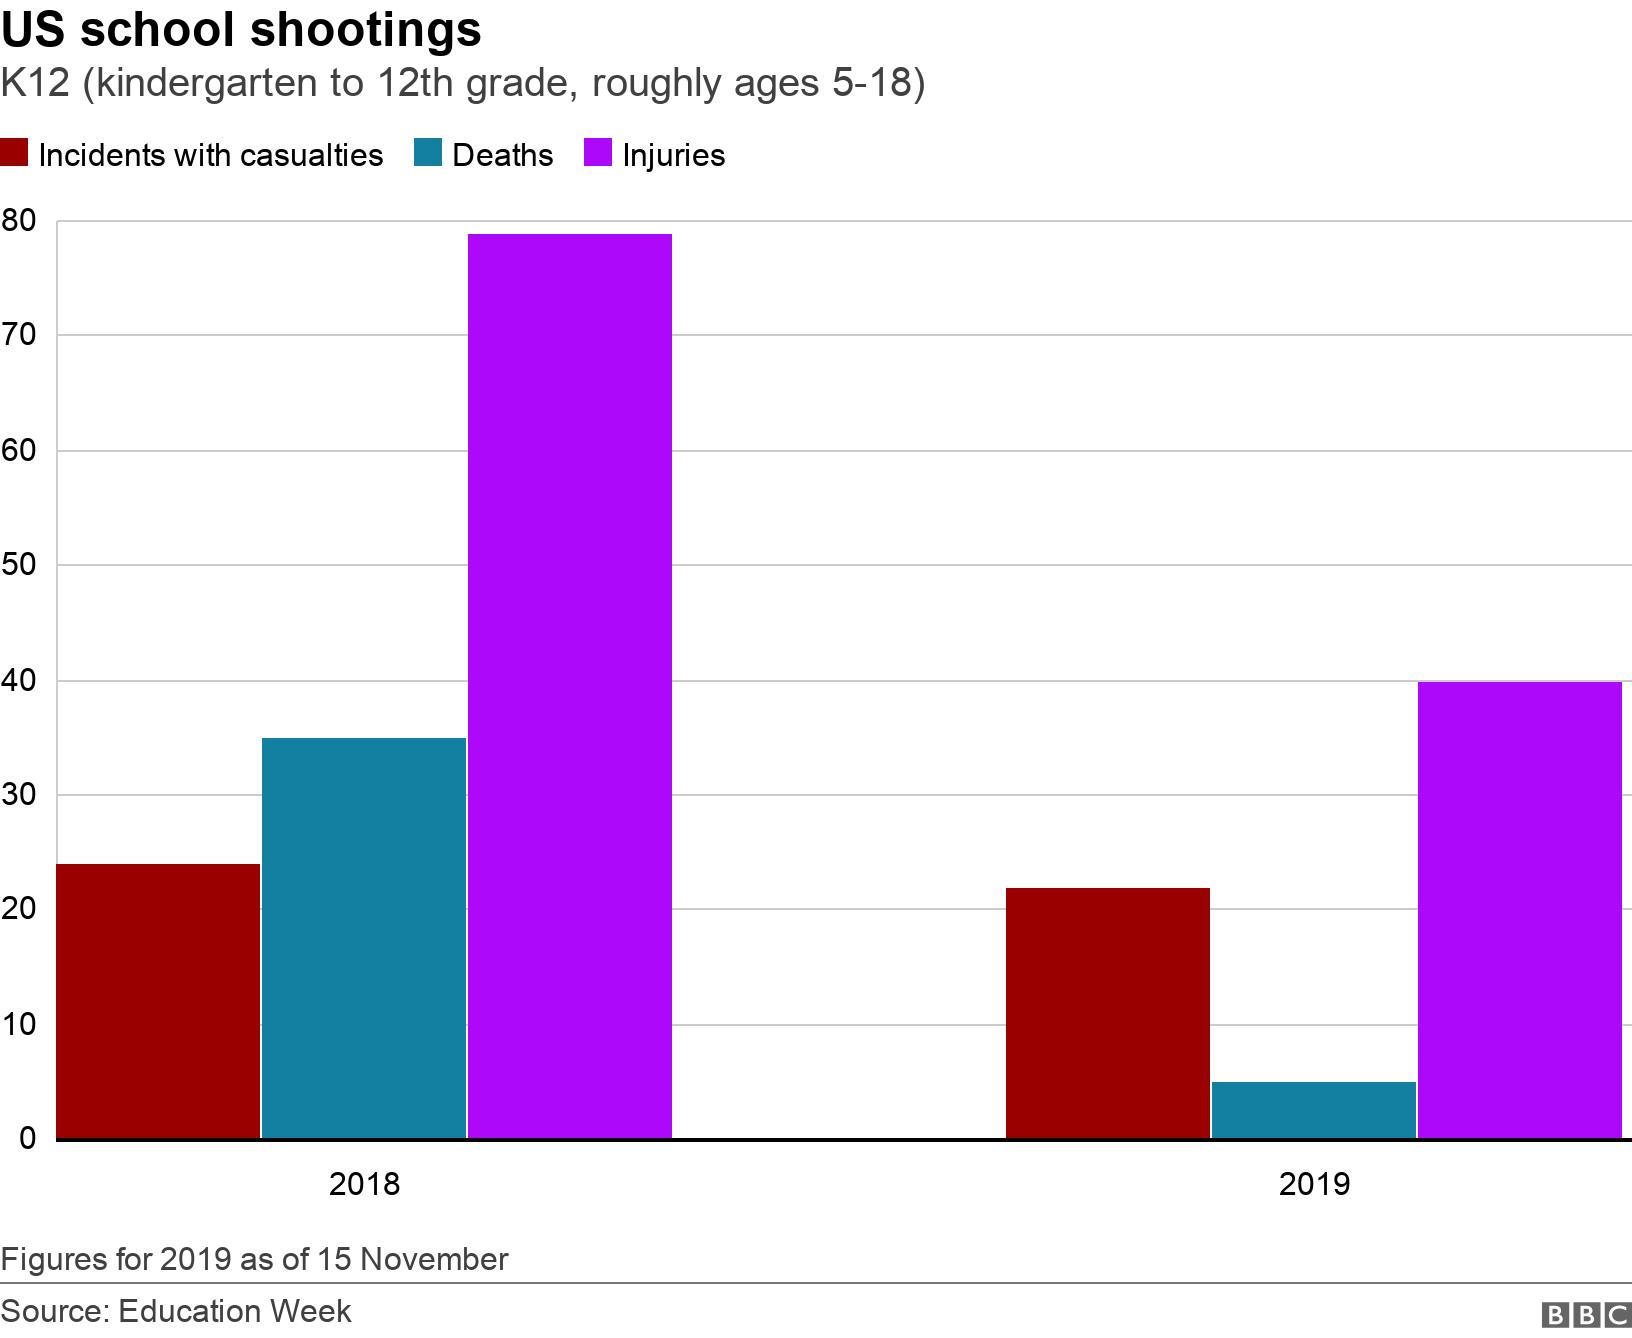 US school shootings. K12  (kindergarten to 12th grade, roughly ages 5-18).  Figures for 2019 as of 15 November.